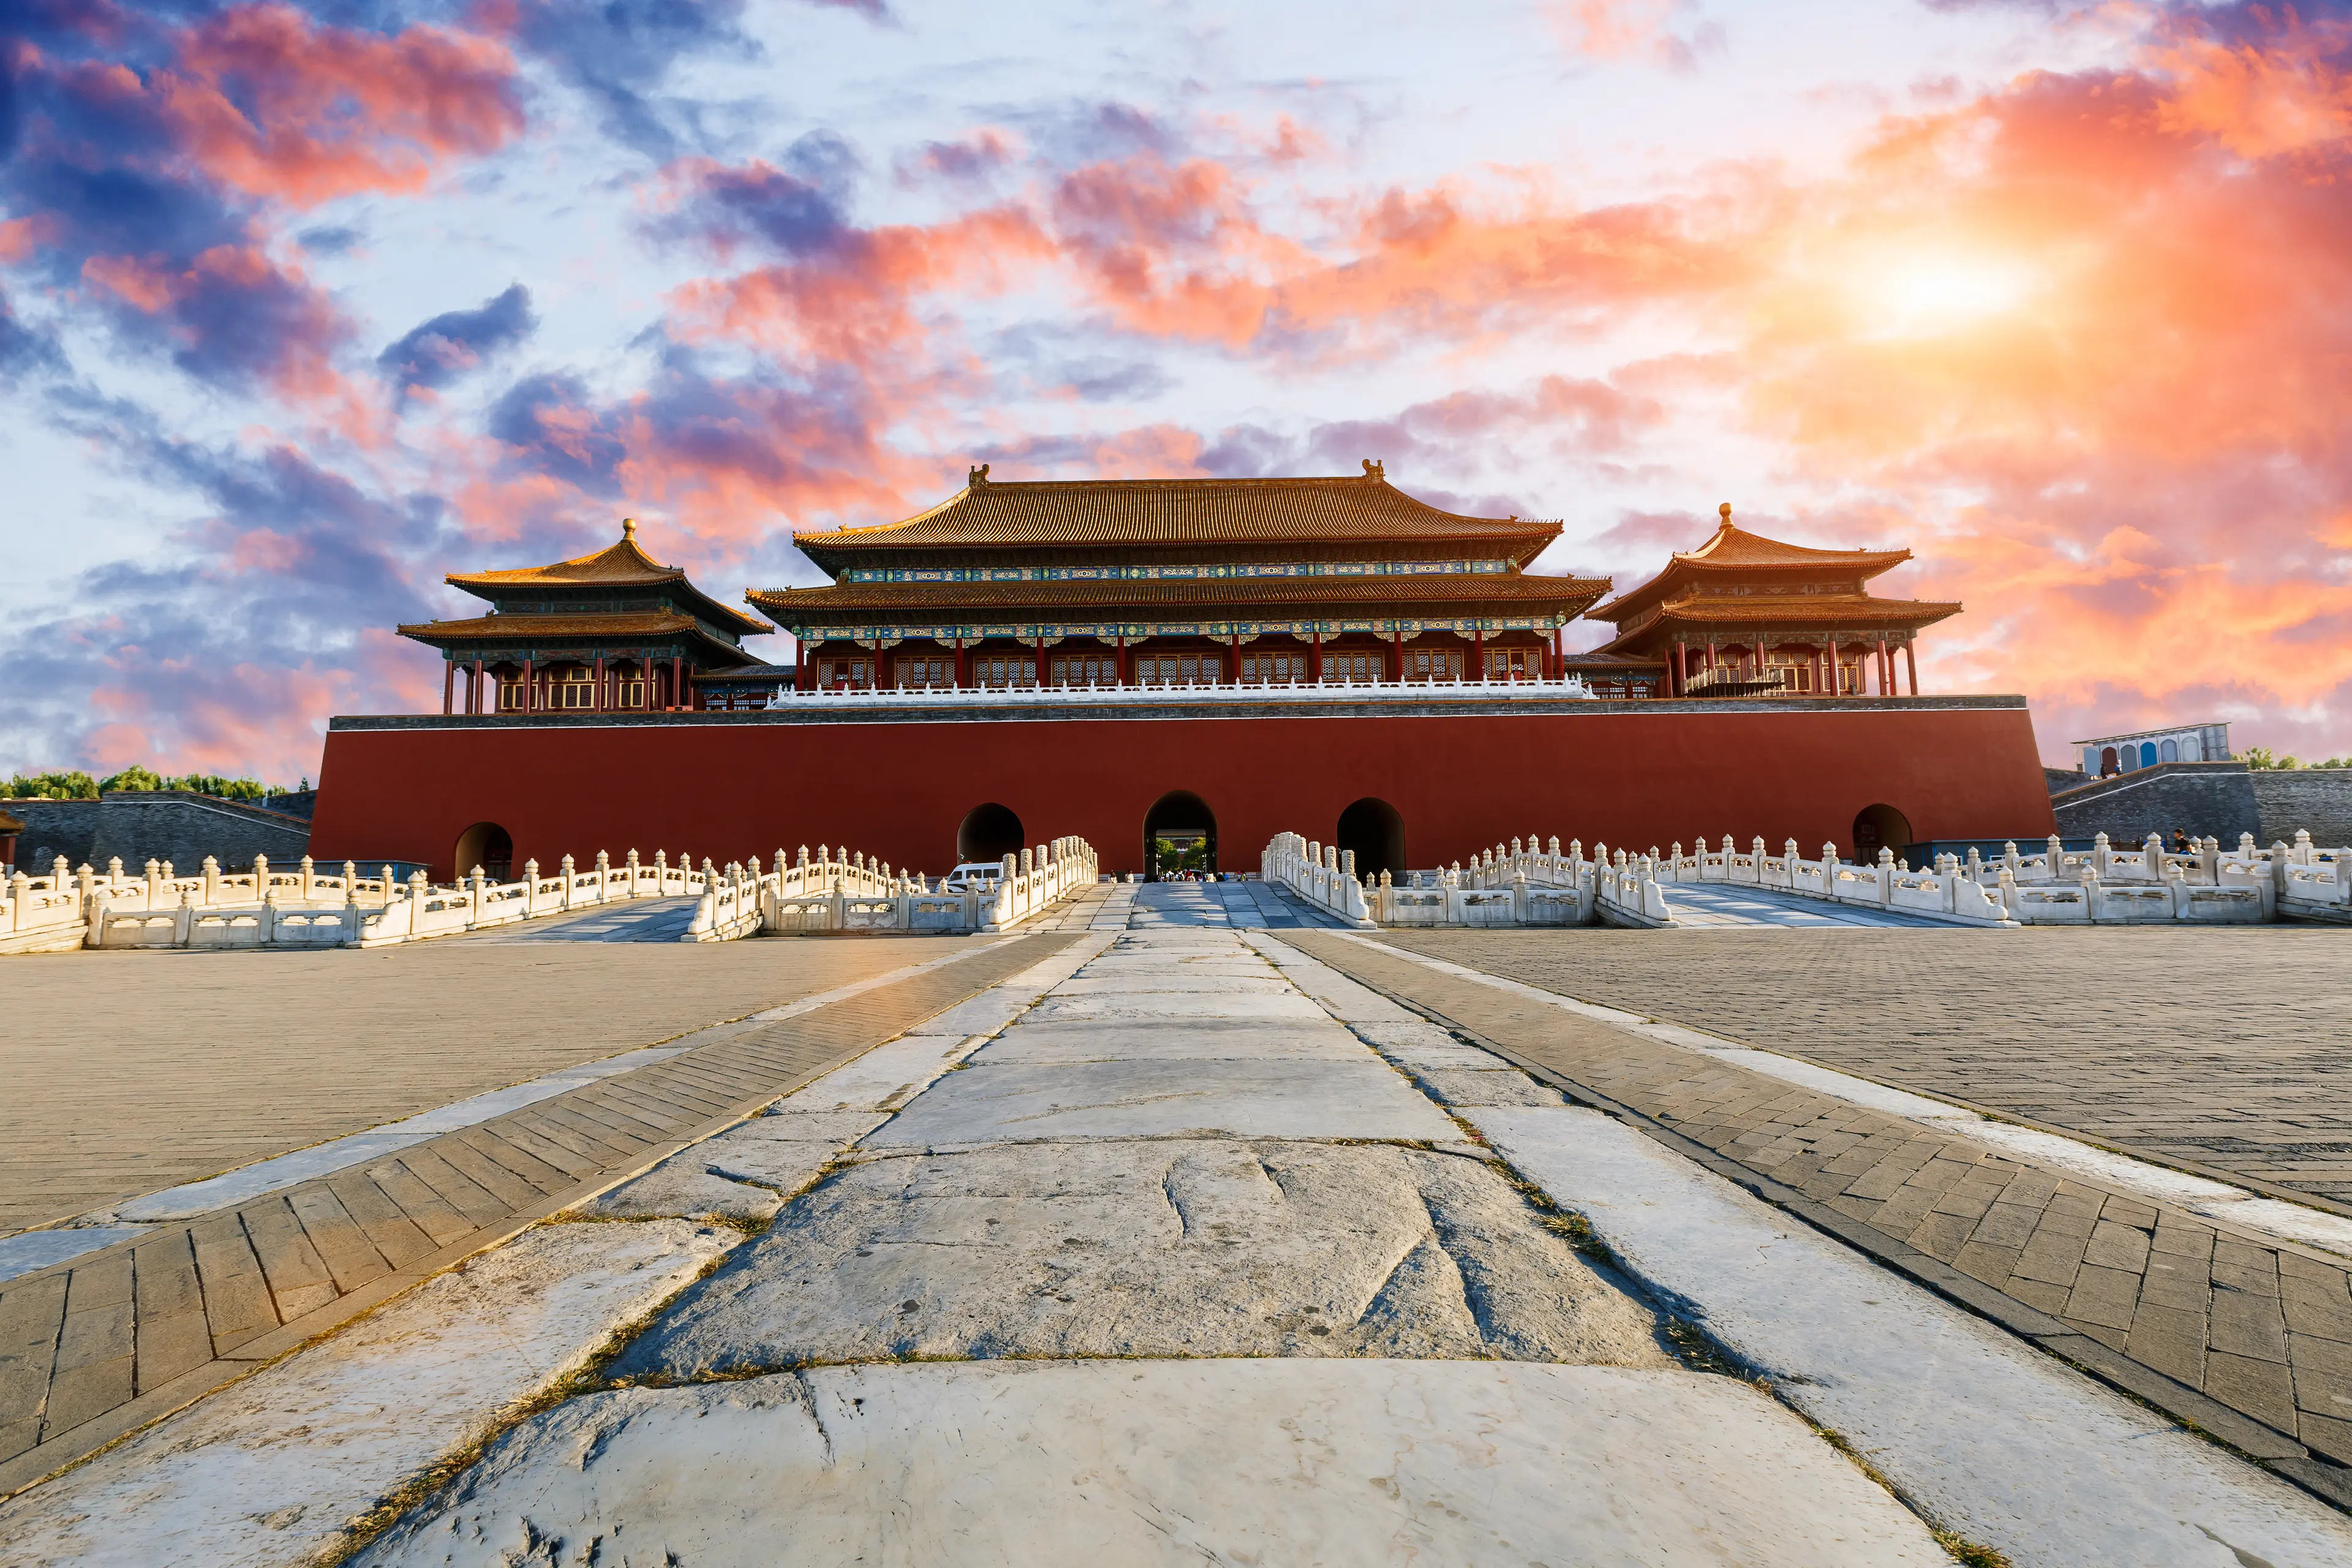 The ancient royal palaces of the Forbidden City